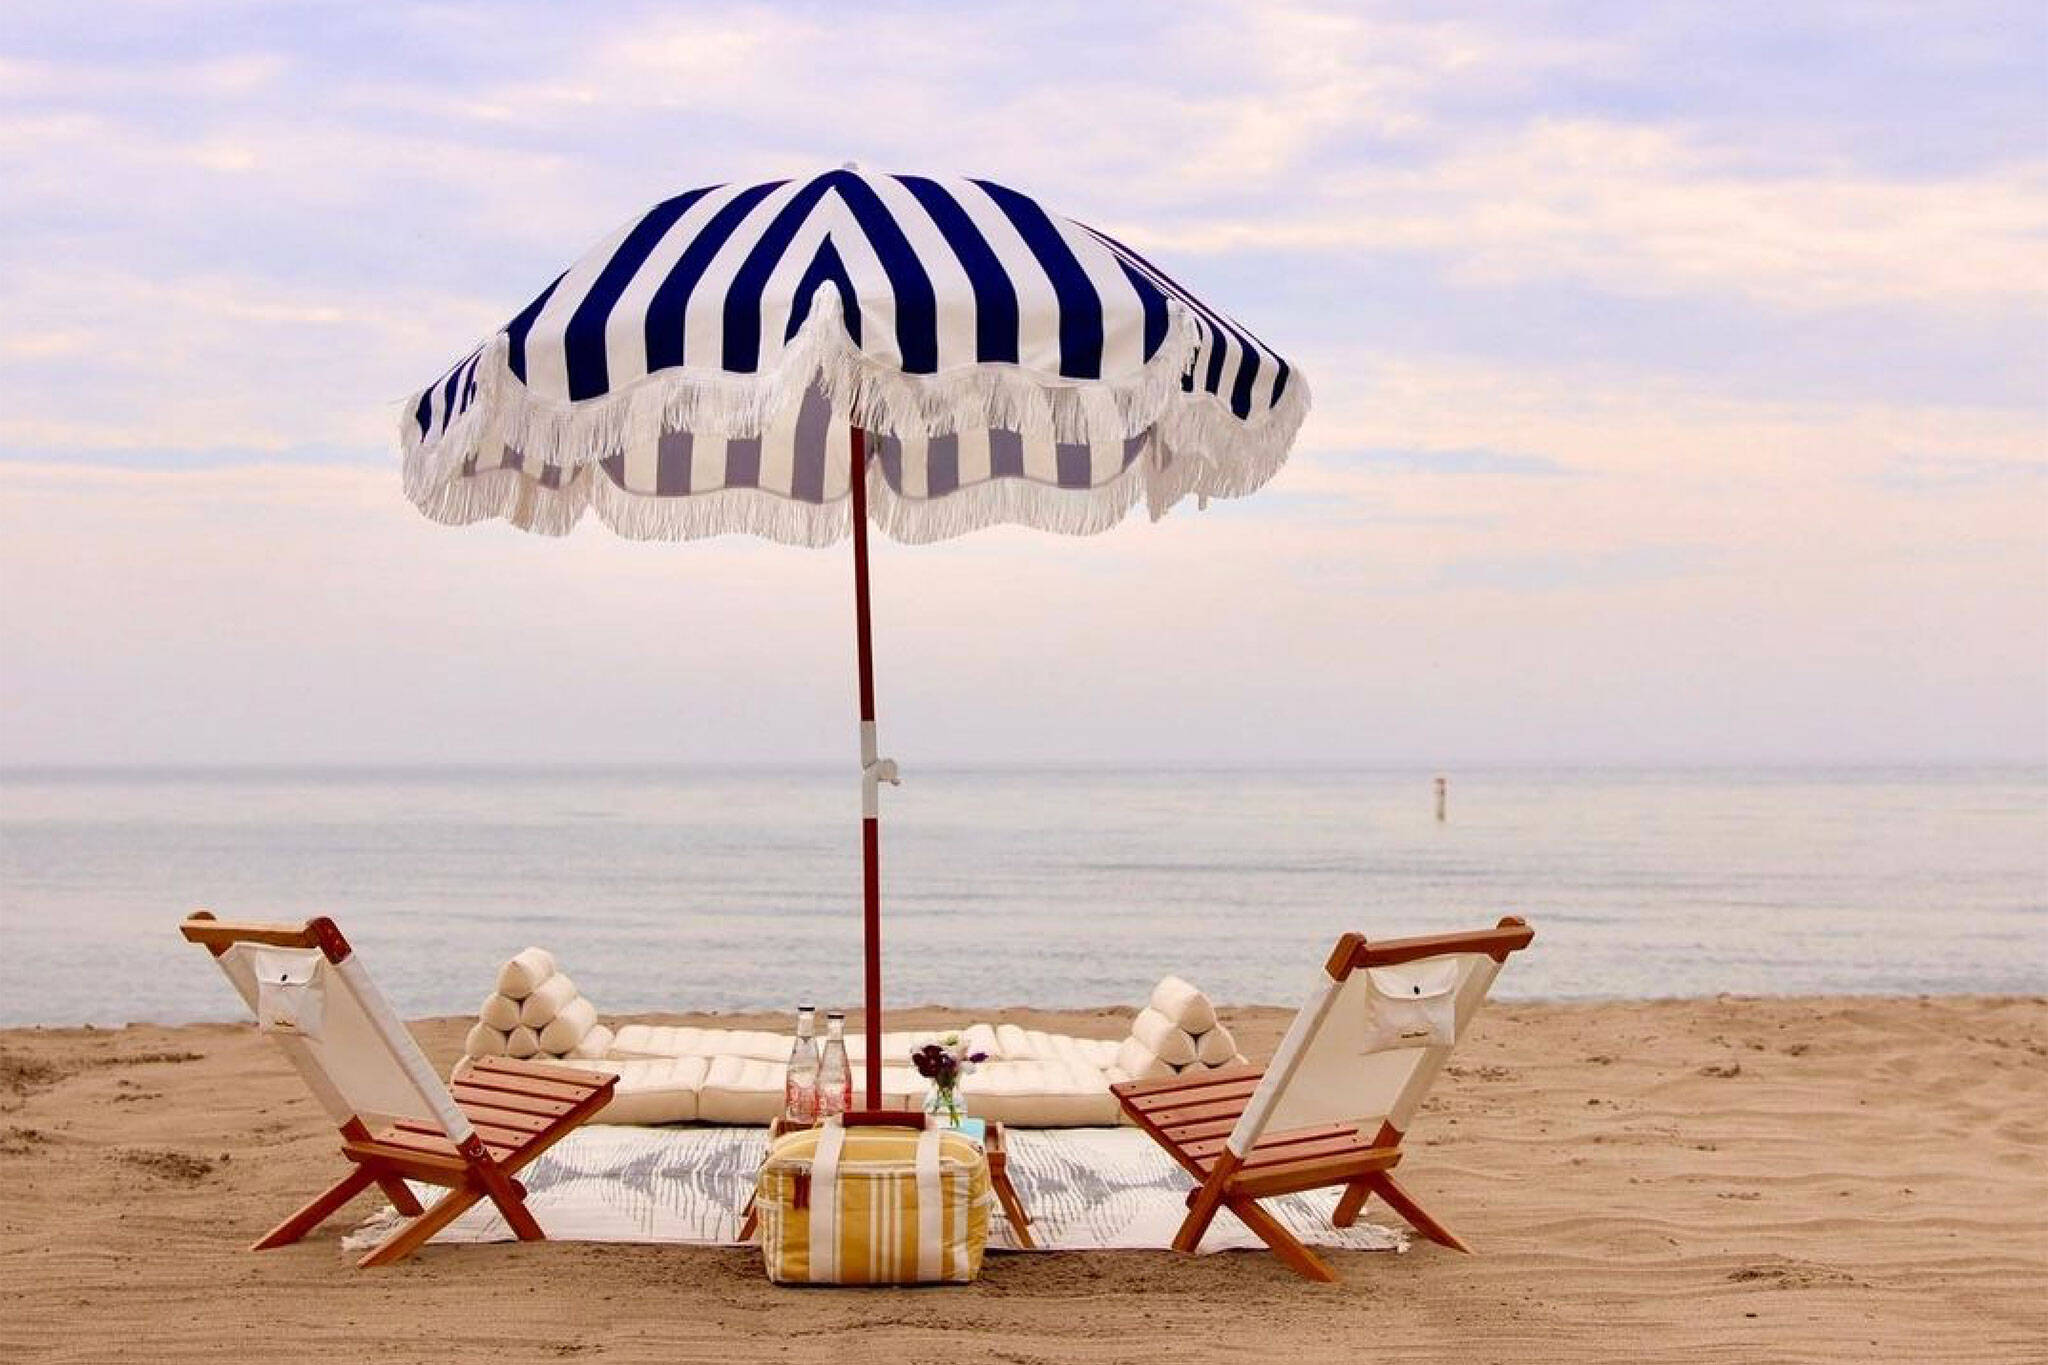 Toronto beach now has luxury lounge chairs you can rent by the hour